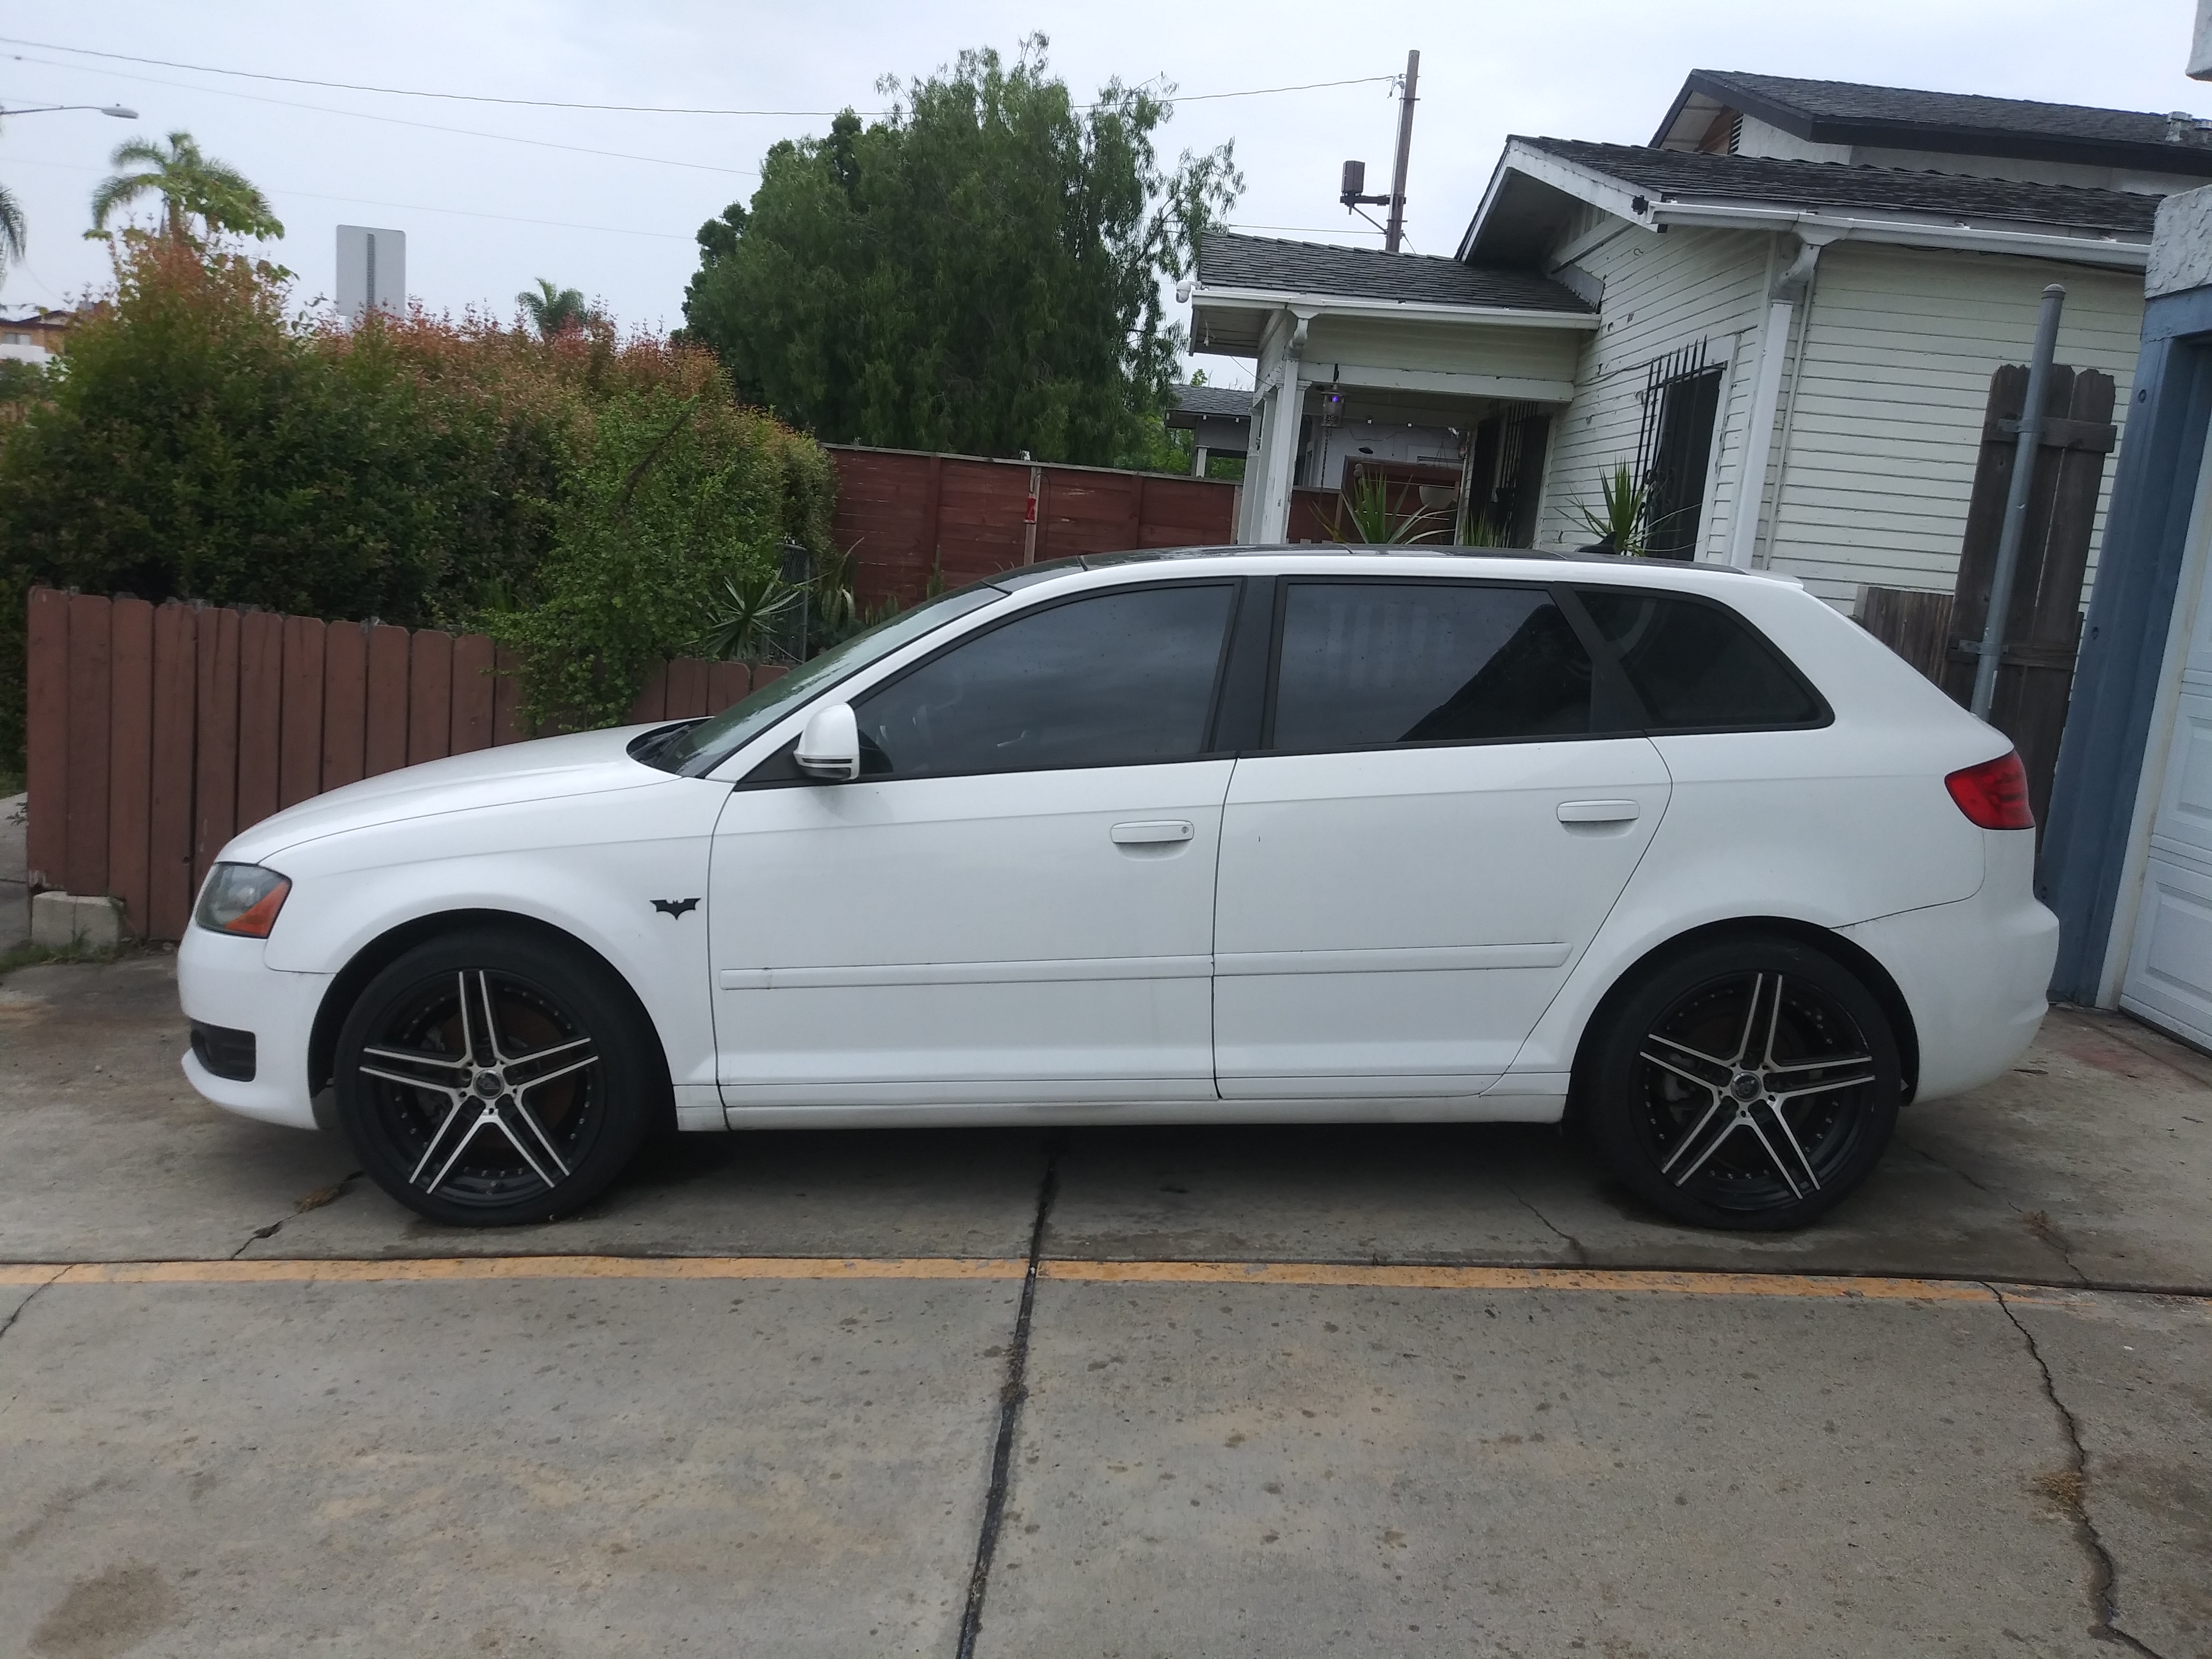 audi a3 8p used – Search for your used car on the parking